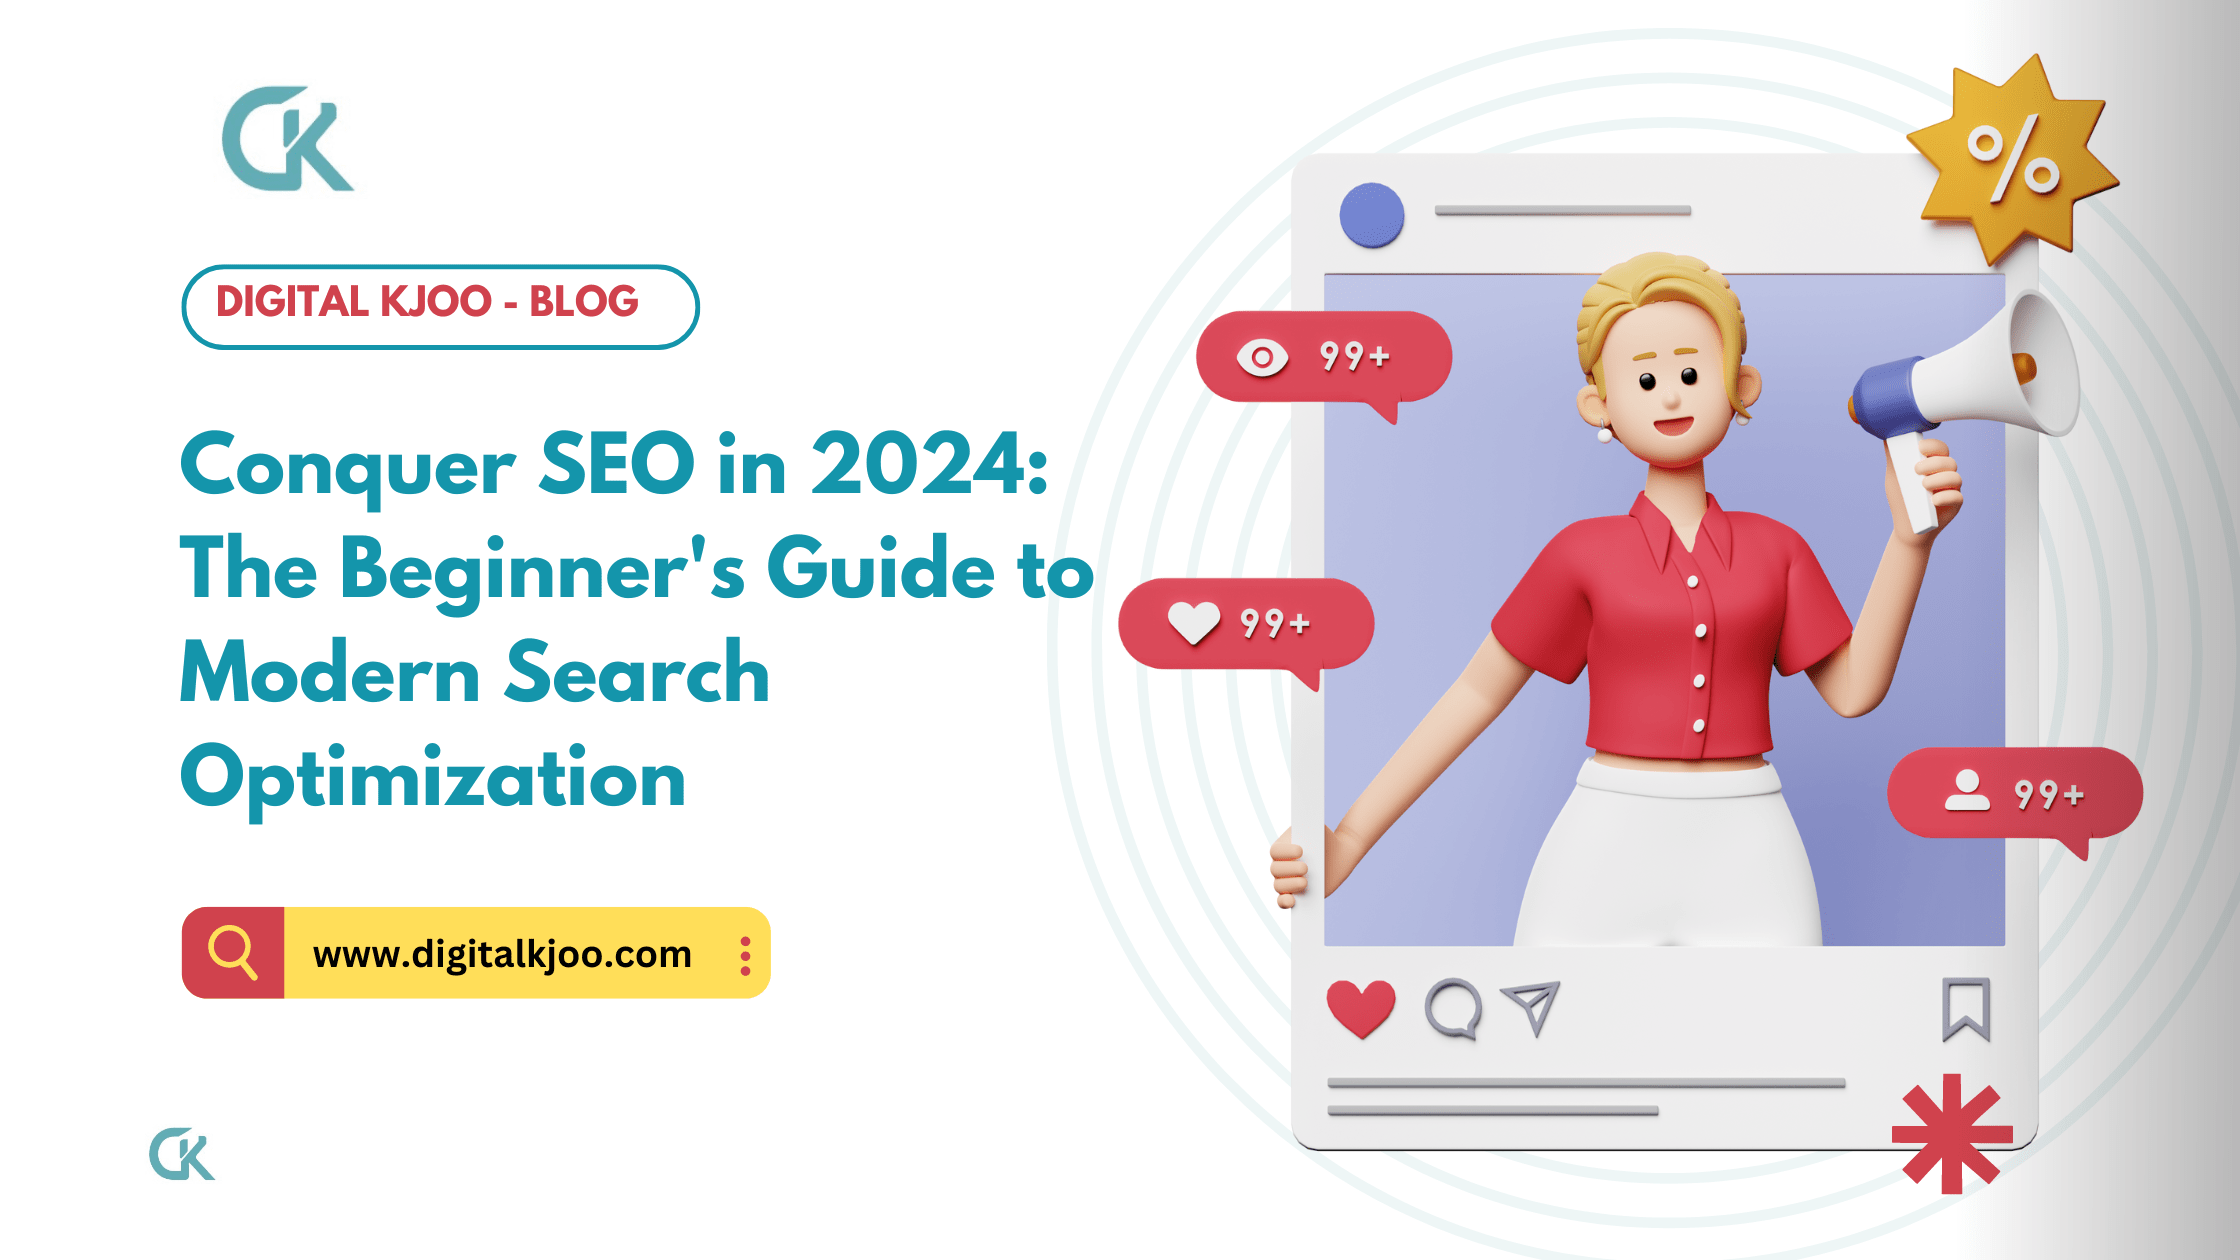 Conquer SEO in 2024: The Beginner's Guide to Modern Search Optimization